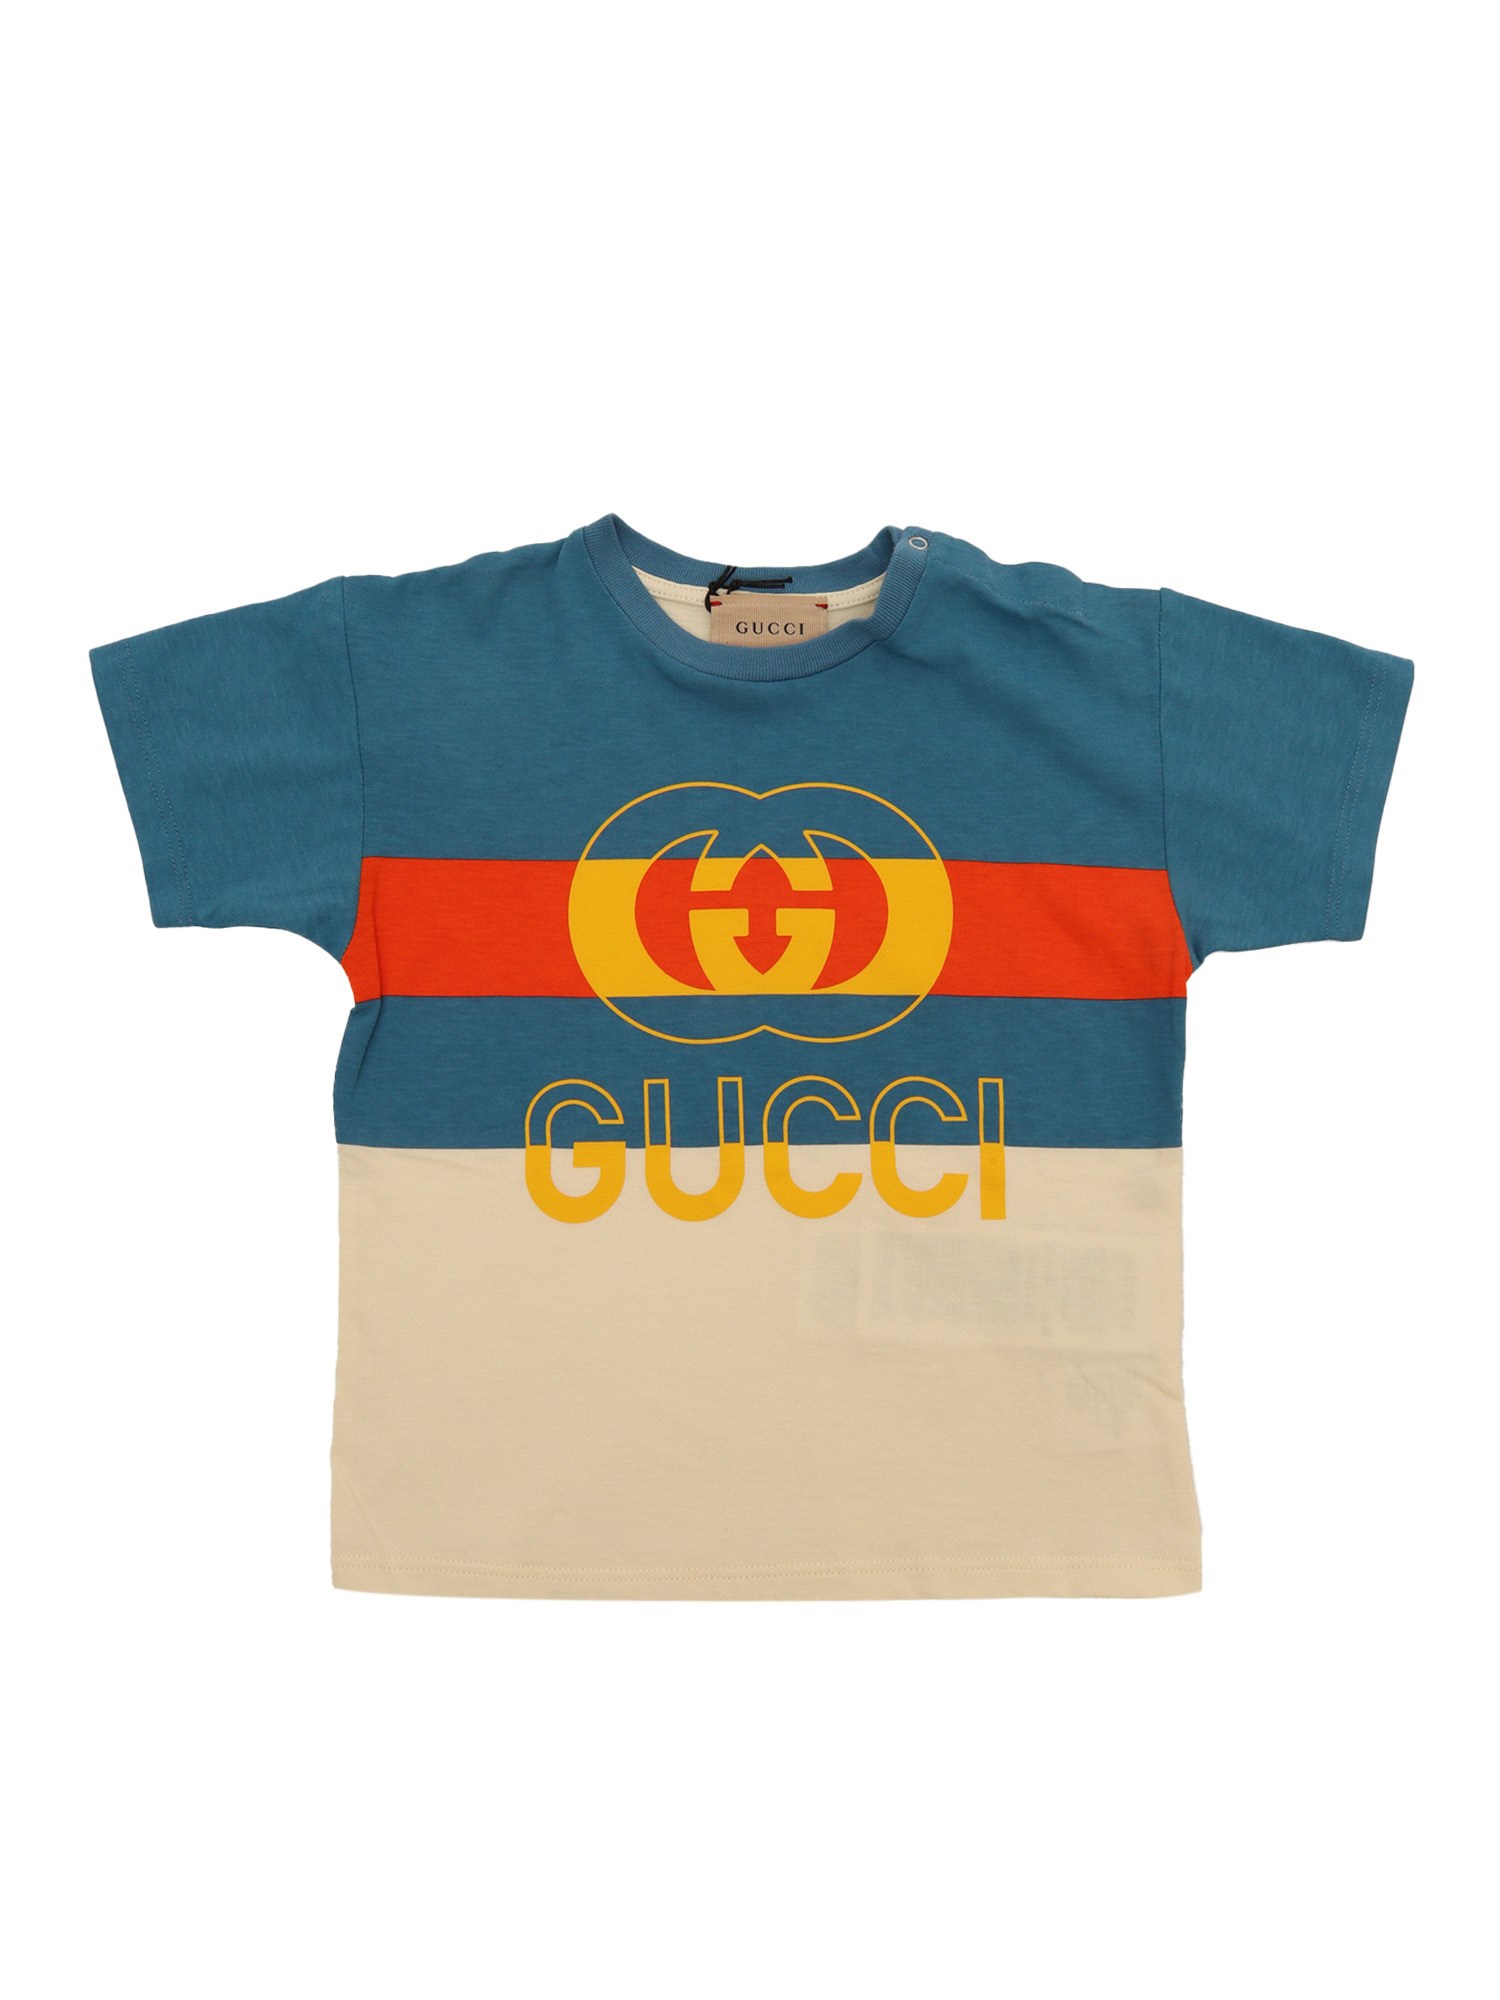 Gucci Kids' Printed Cotton T-shirt In Blue